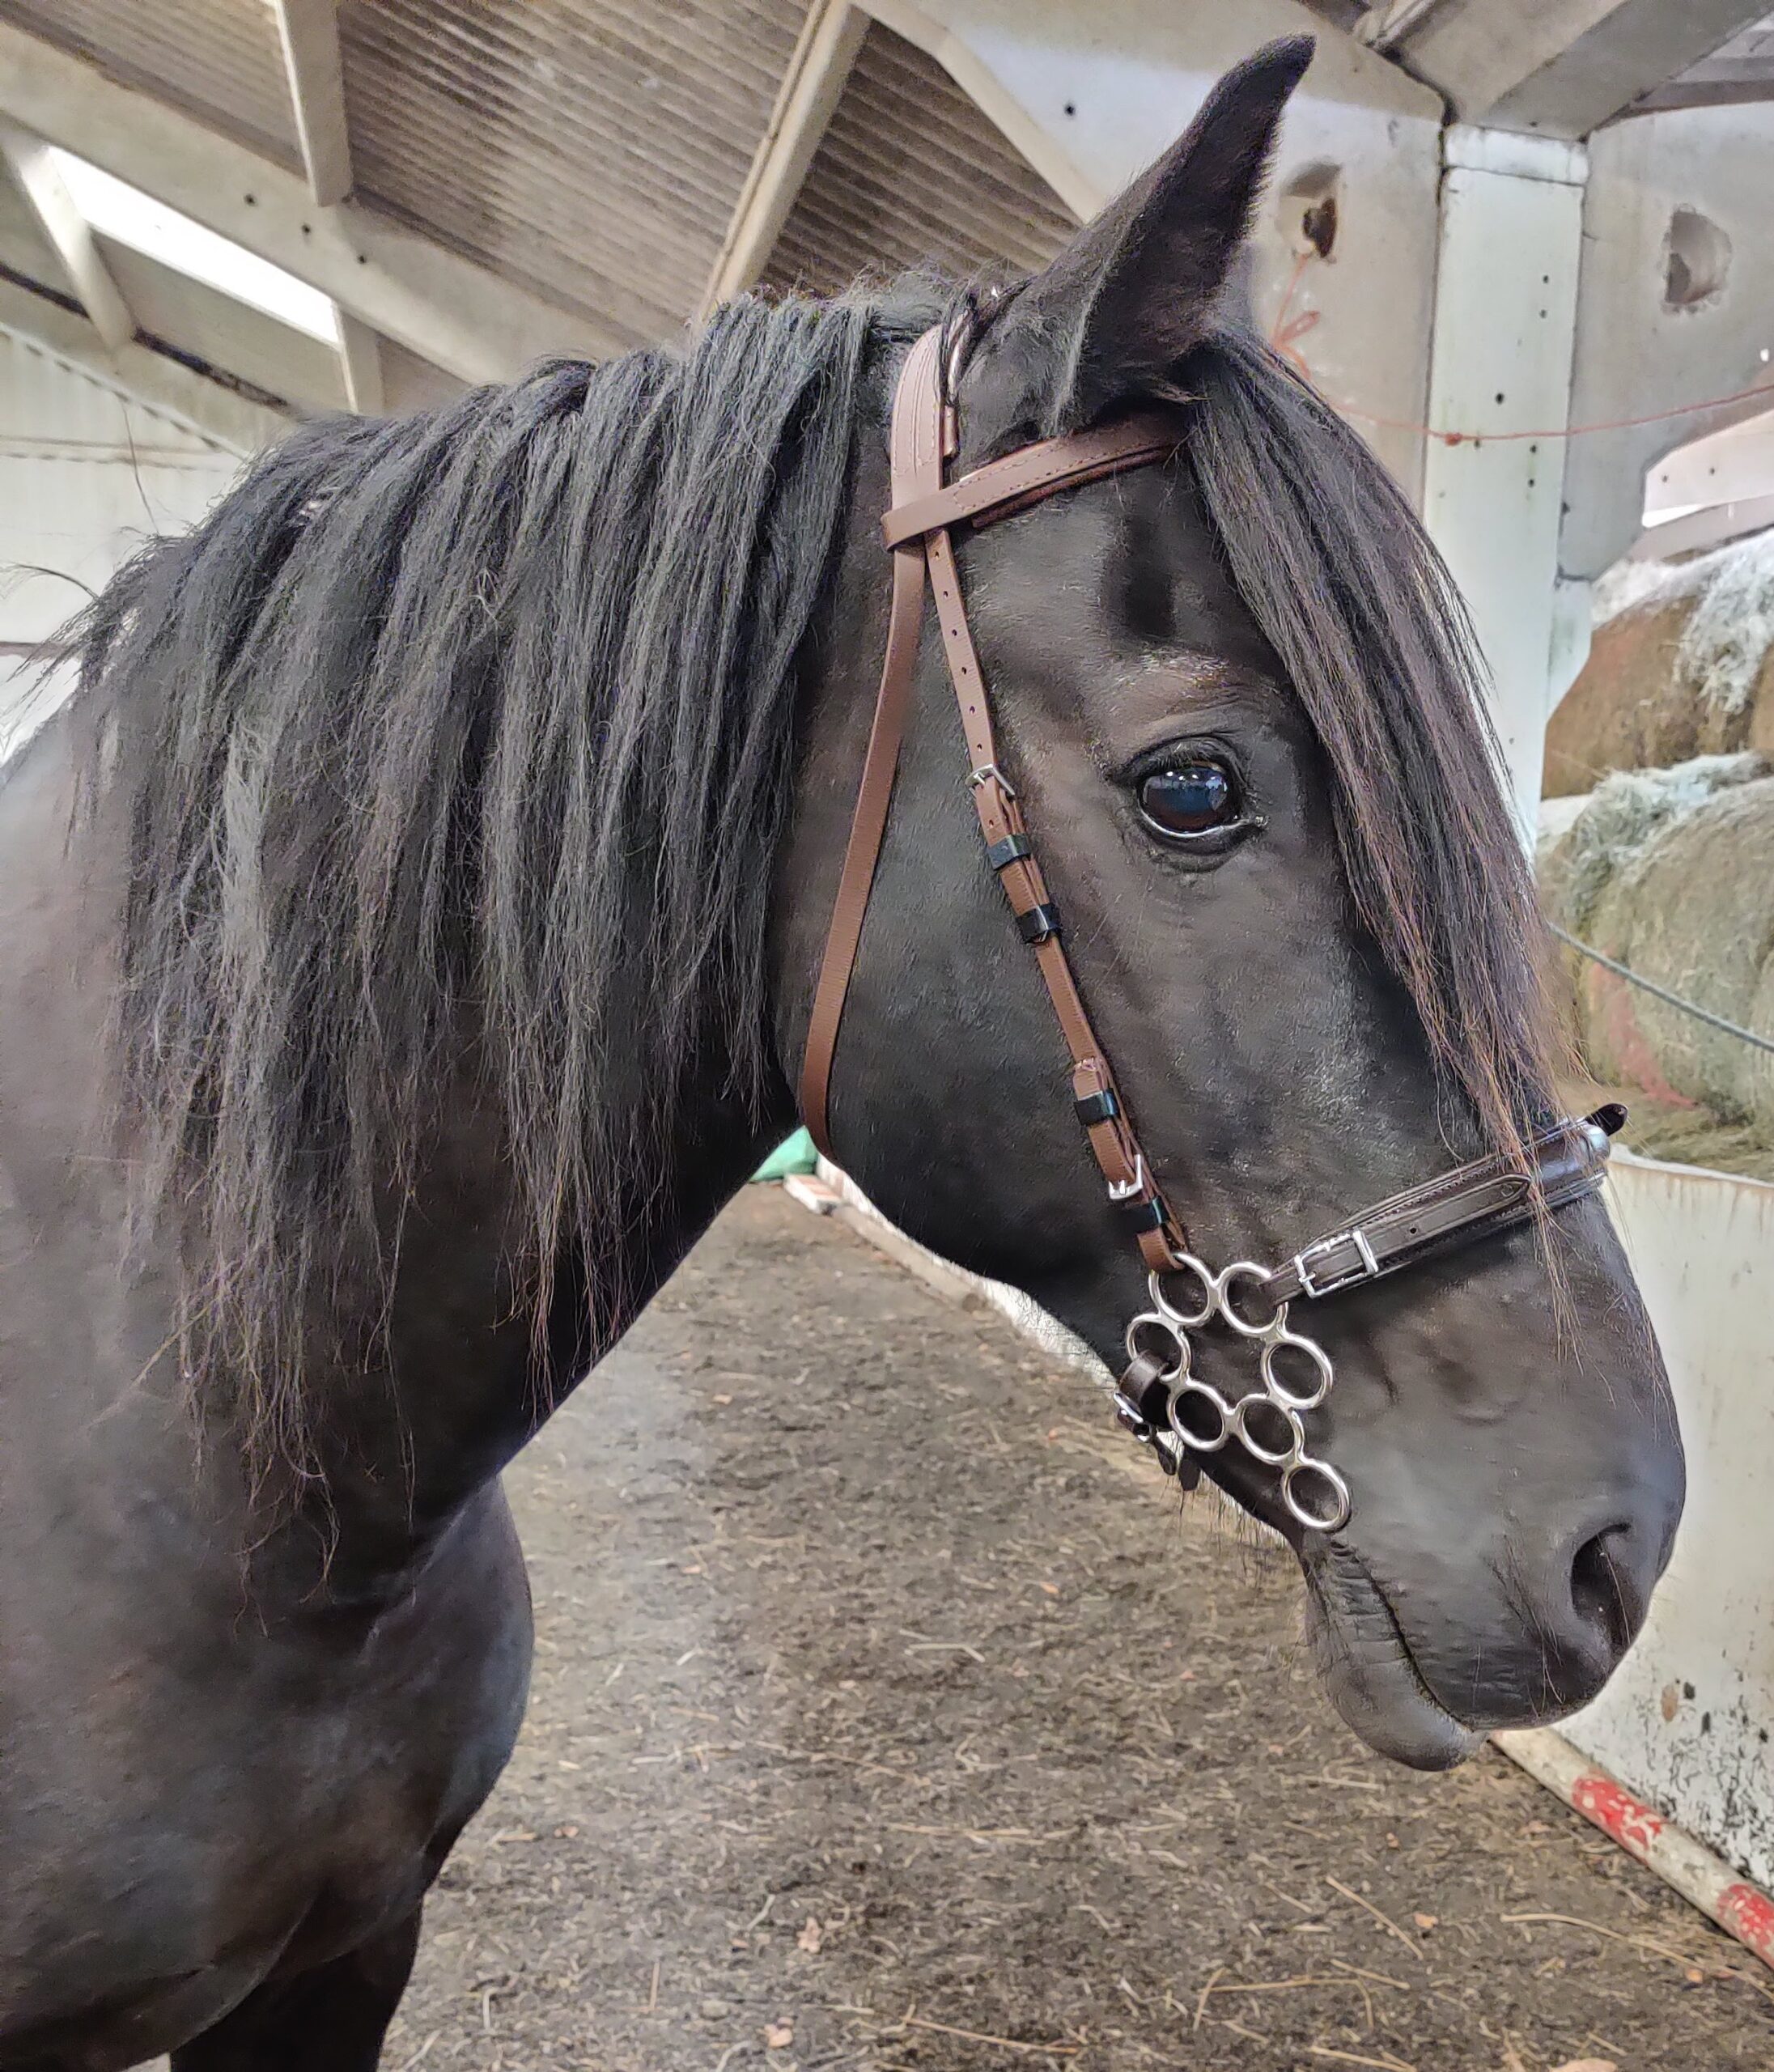 Hari section D cob showing the Calli Rose bitless bridle noseband attachment on Zilco synthetic headstall